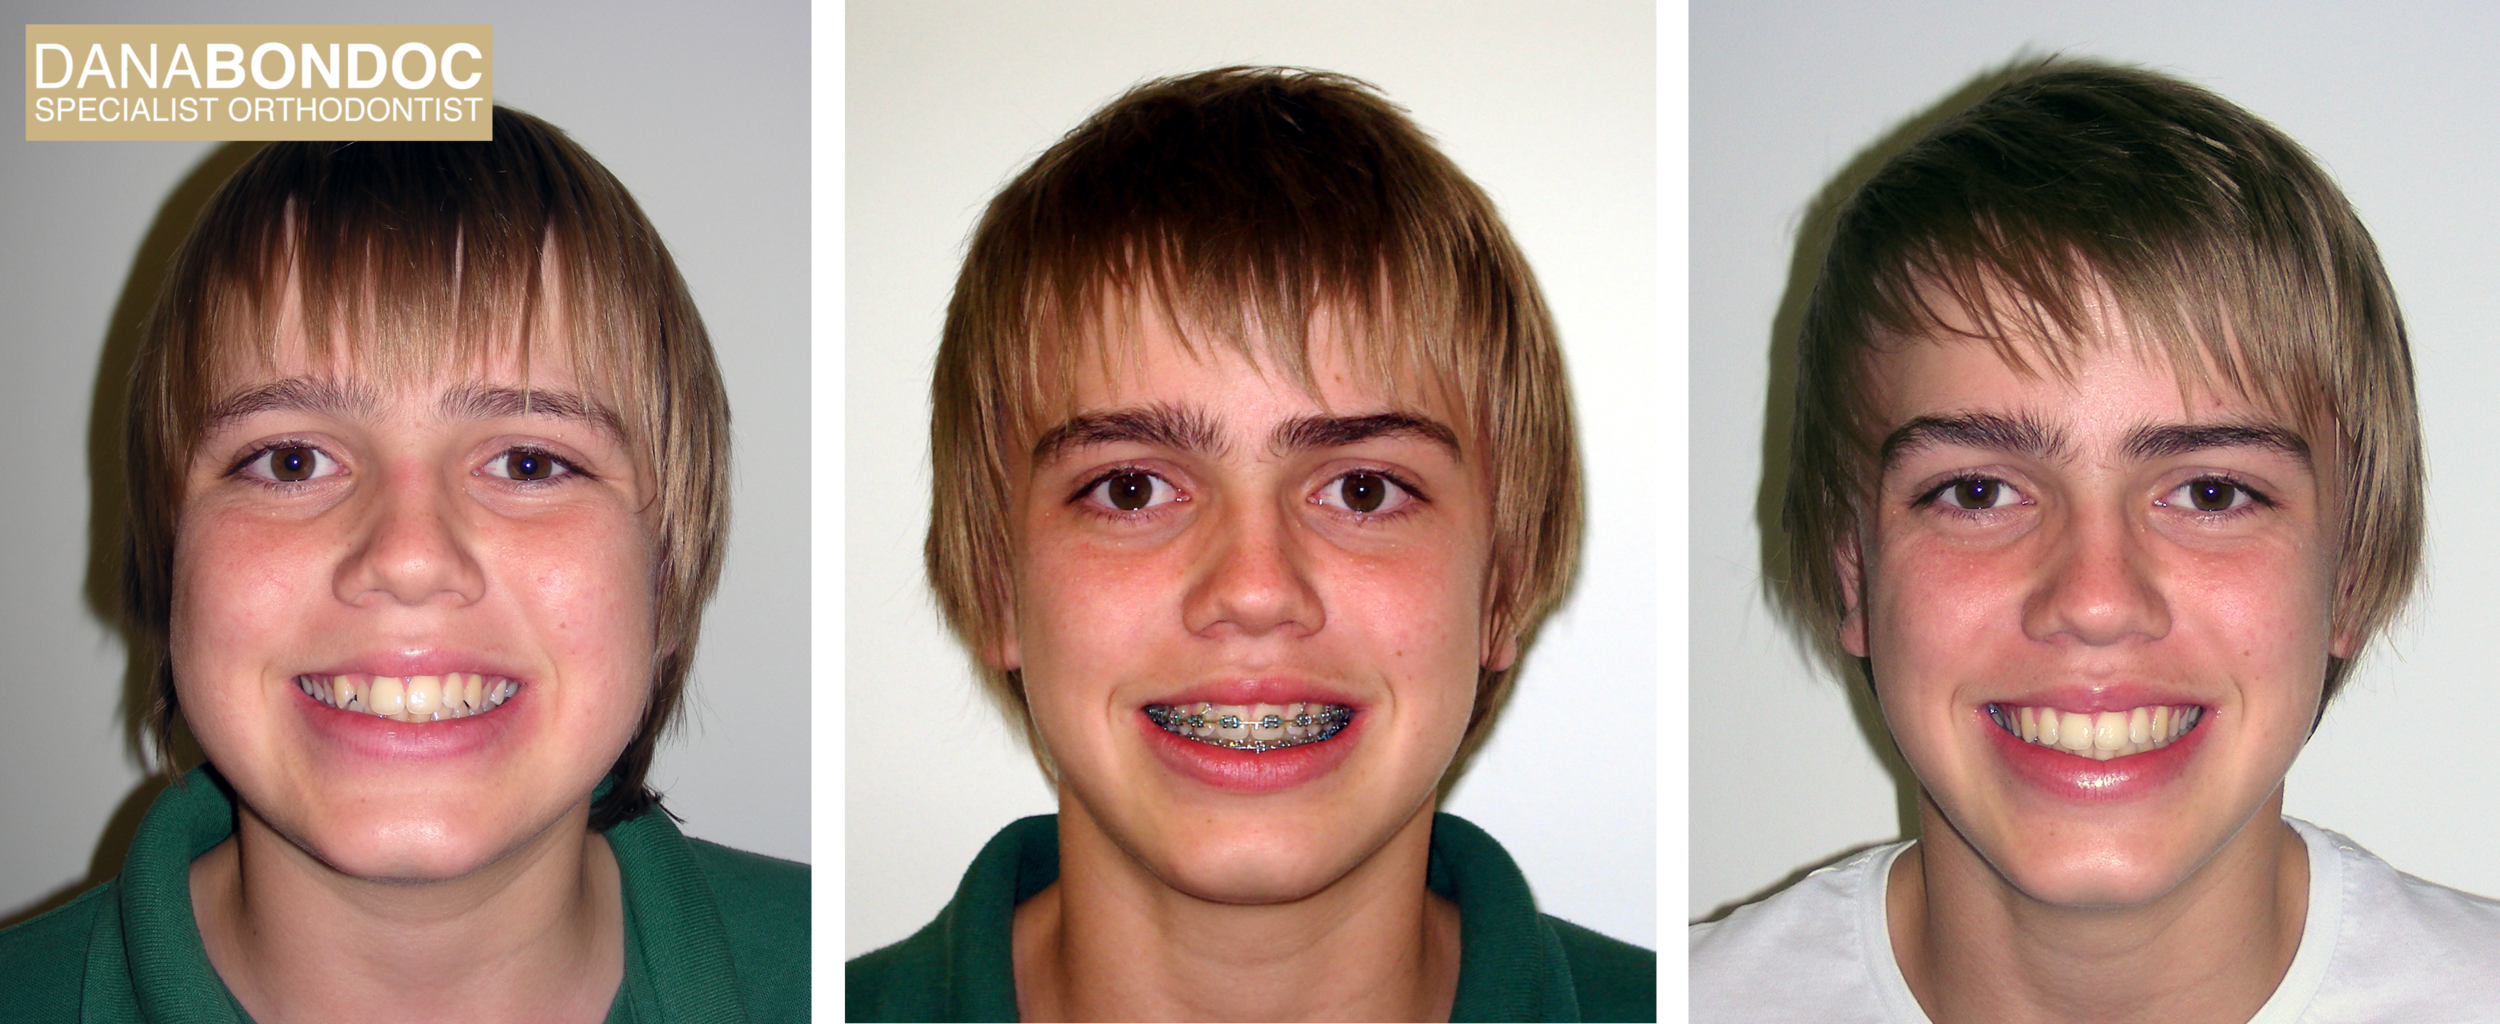 Before treatment, with metal braces on, after treatment photos of a male teenager for the treatment of an anterior cross bite.